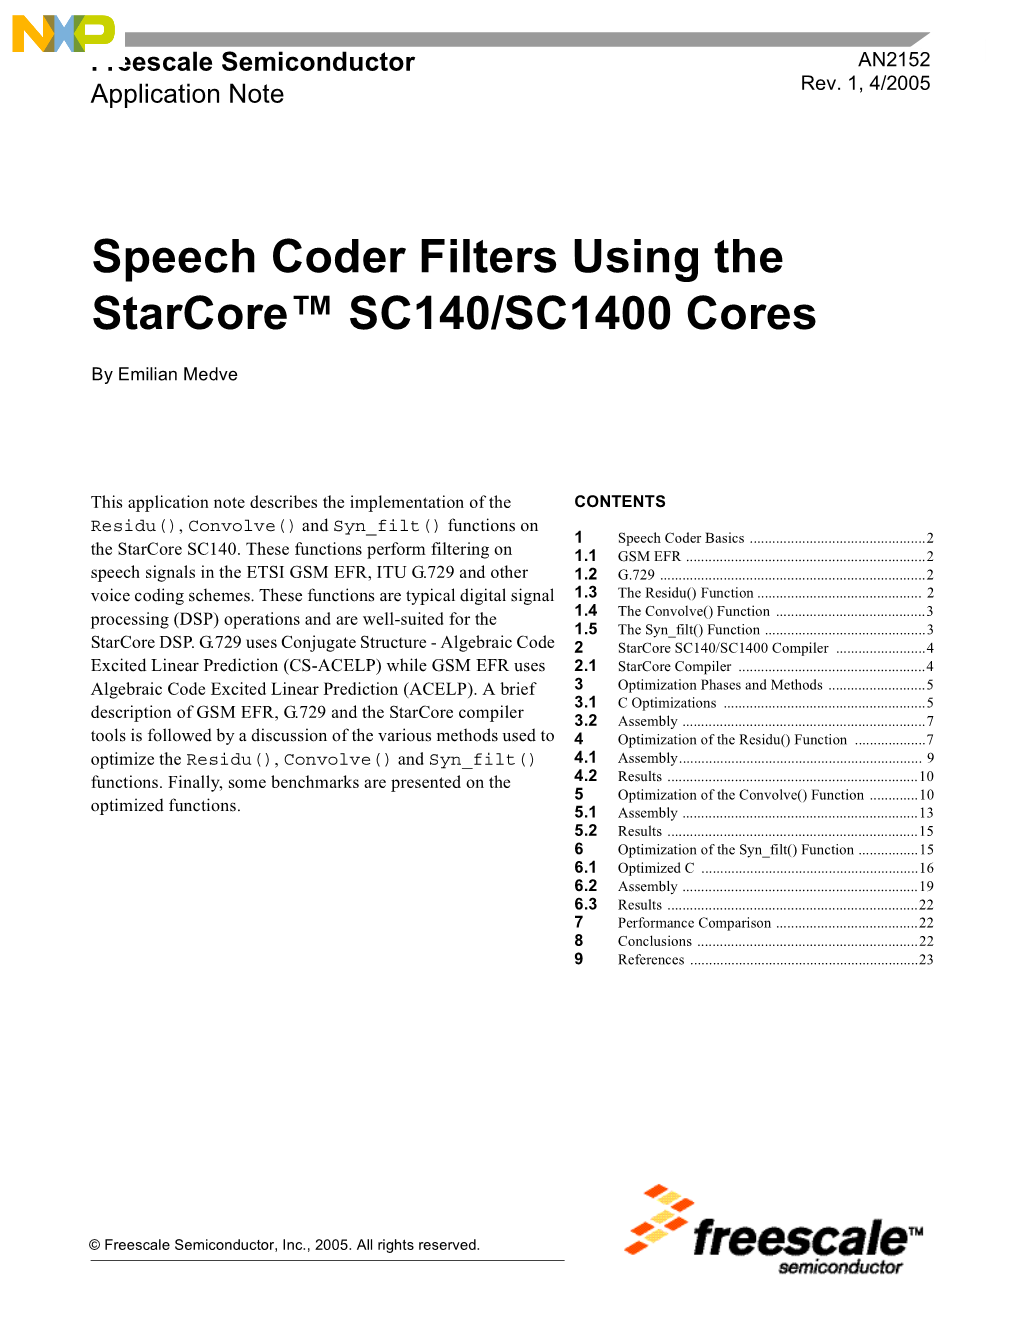 Speech Coder Filters Using the Starcore SC140/SC1400 Cores